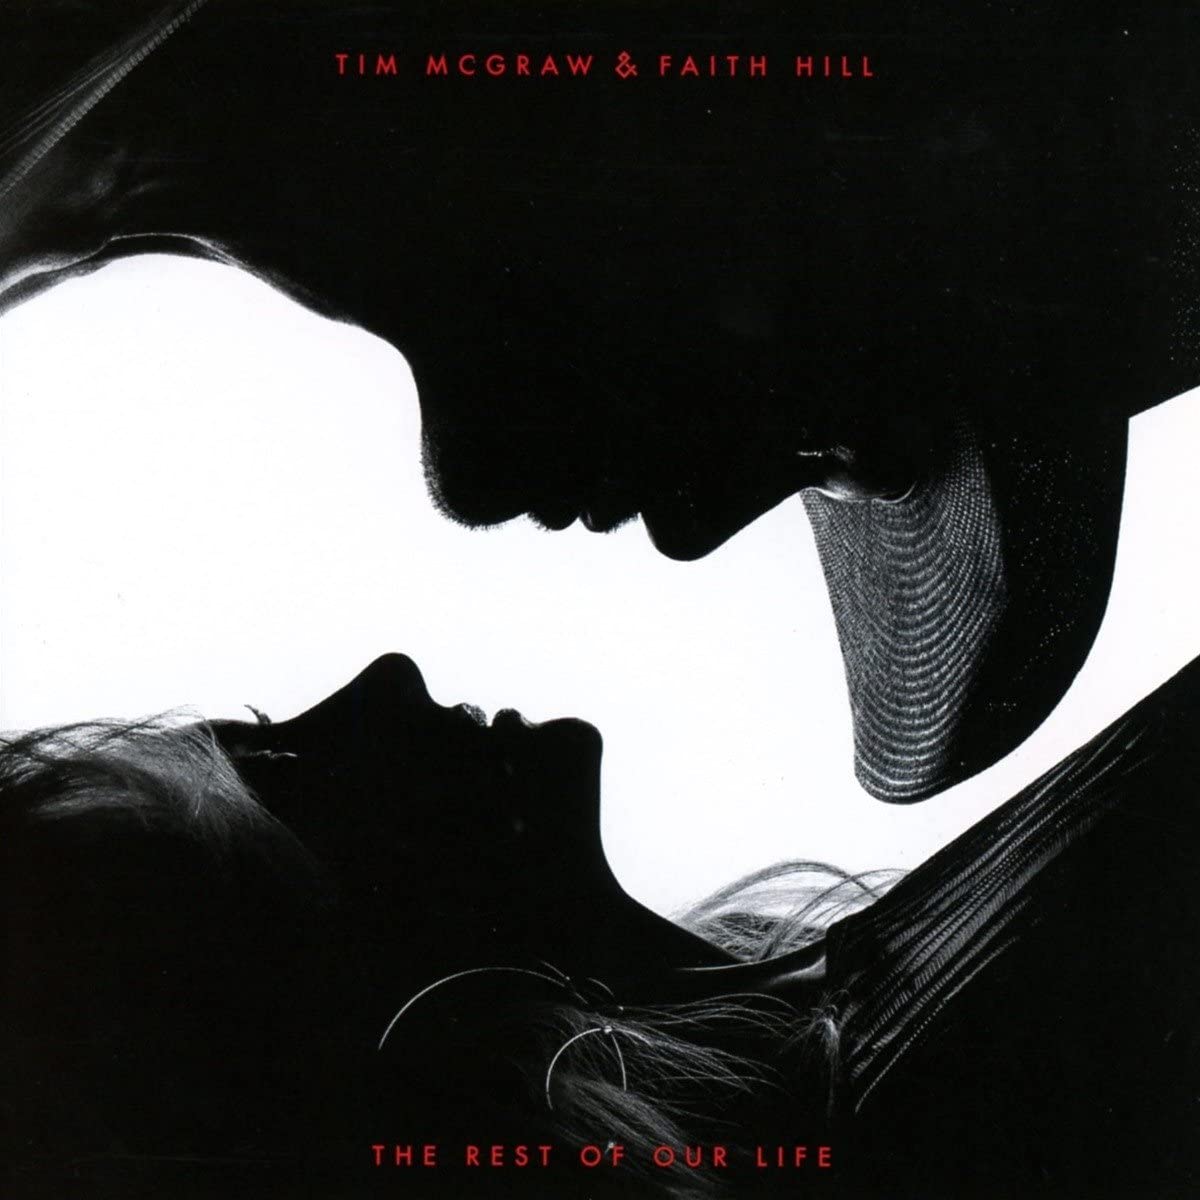 Faith Hill & Tim McGraw - The Rest of Our Life Album Cover